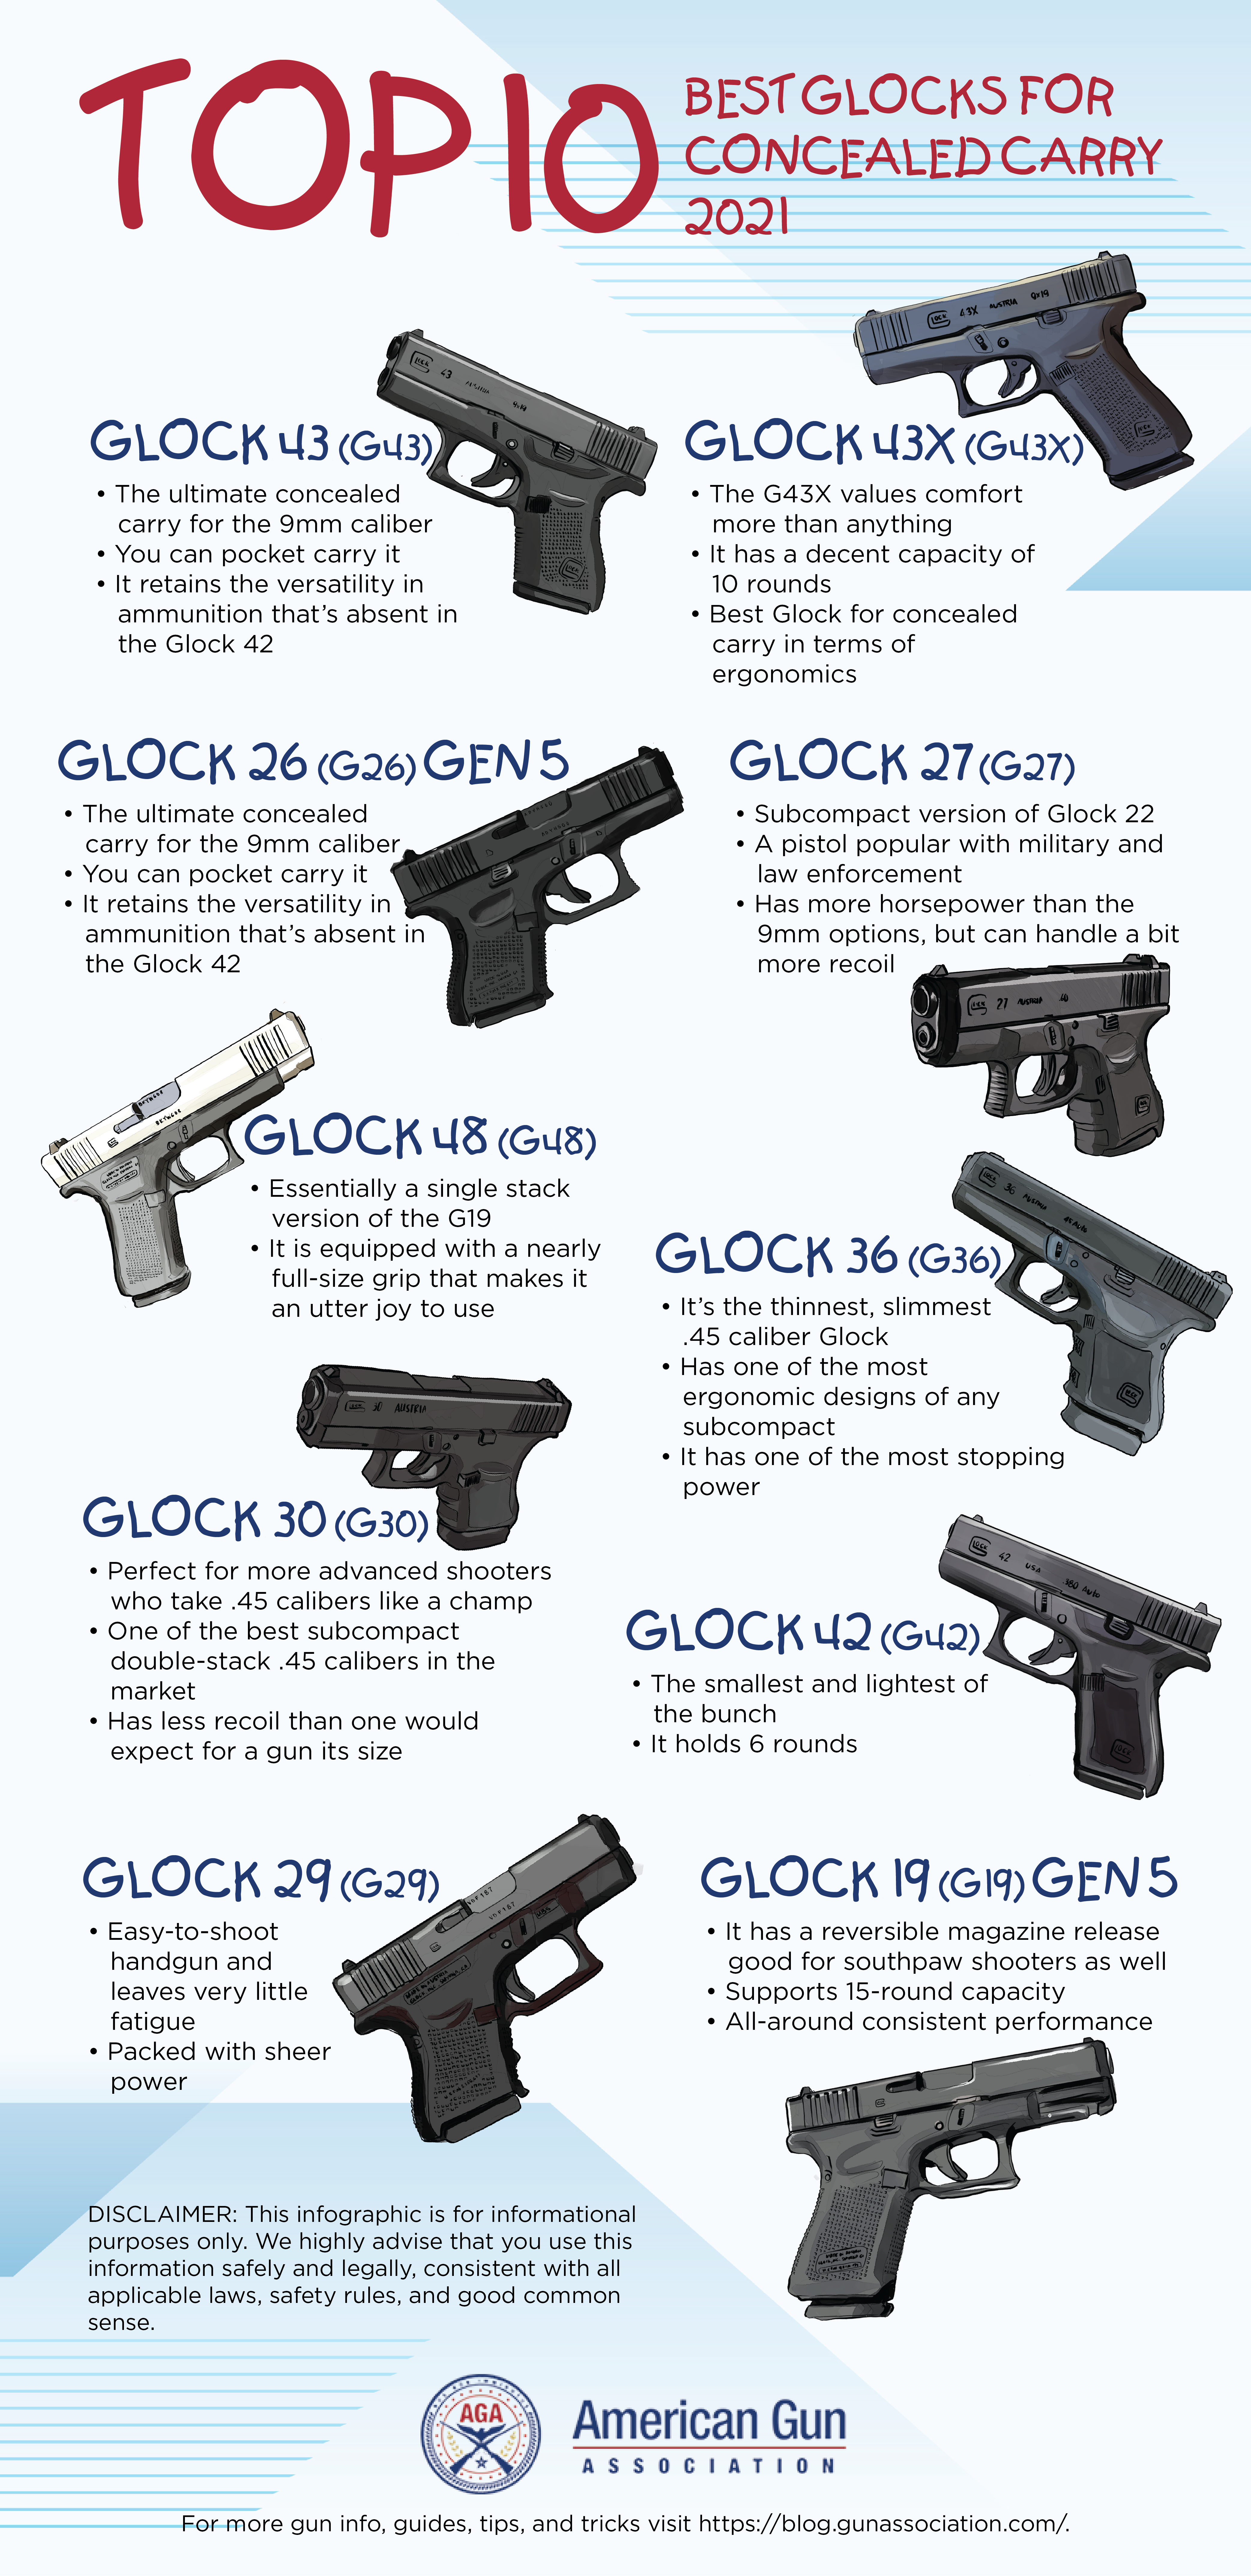 Top 10 Best Glocks For Concealed Carry 2021 Infographics